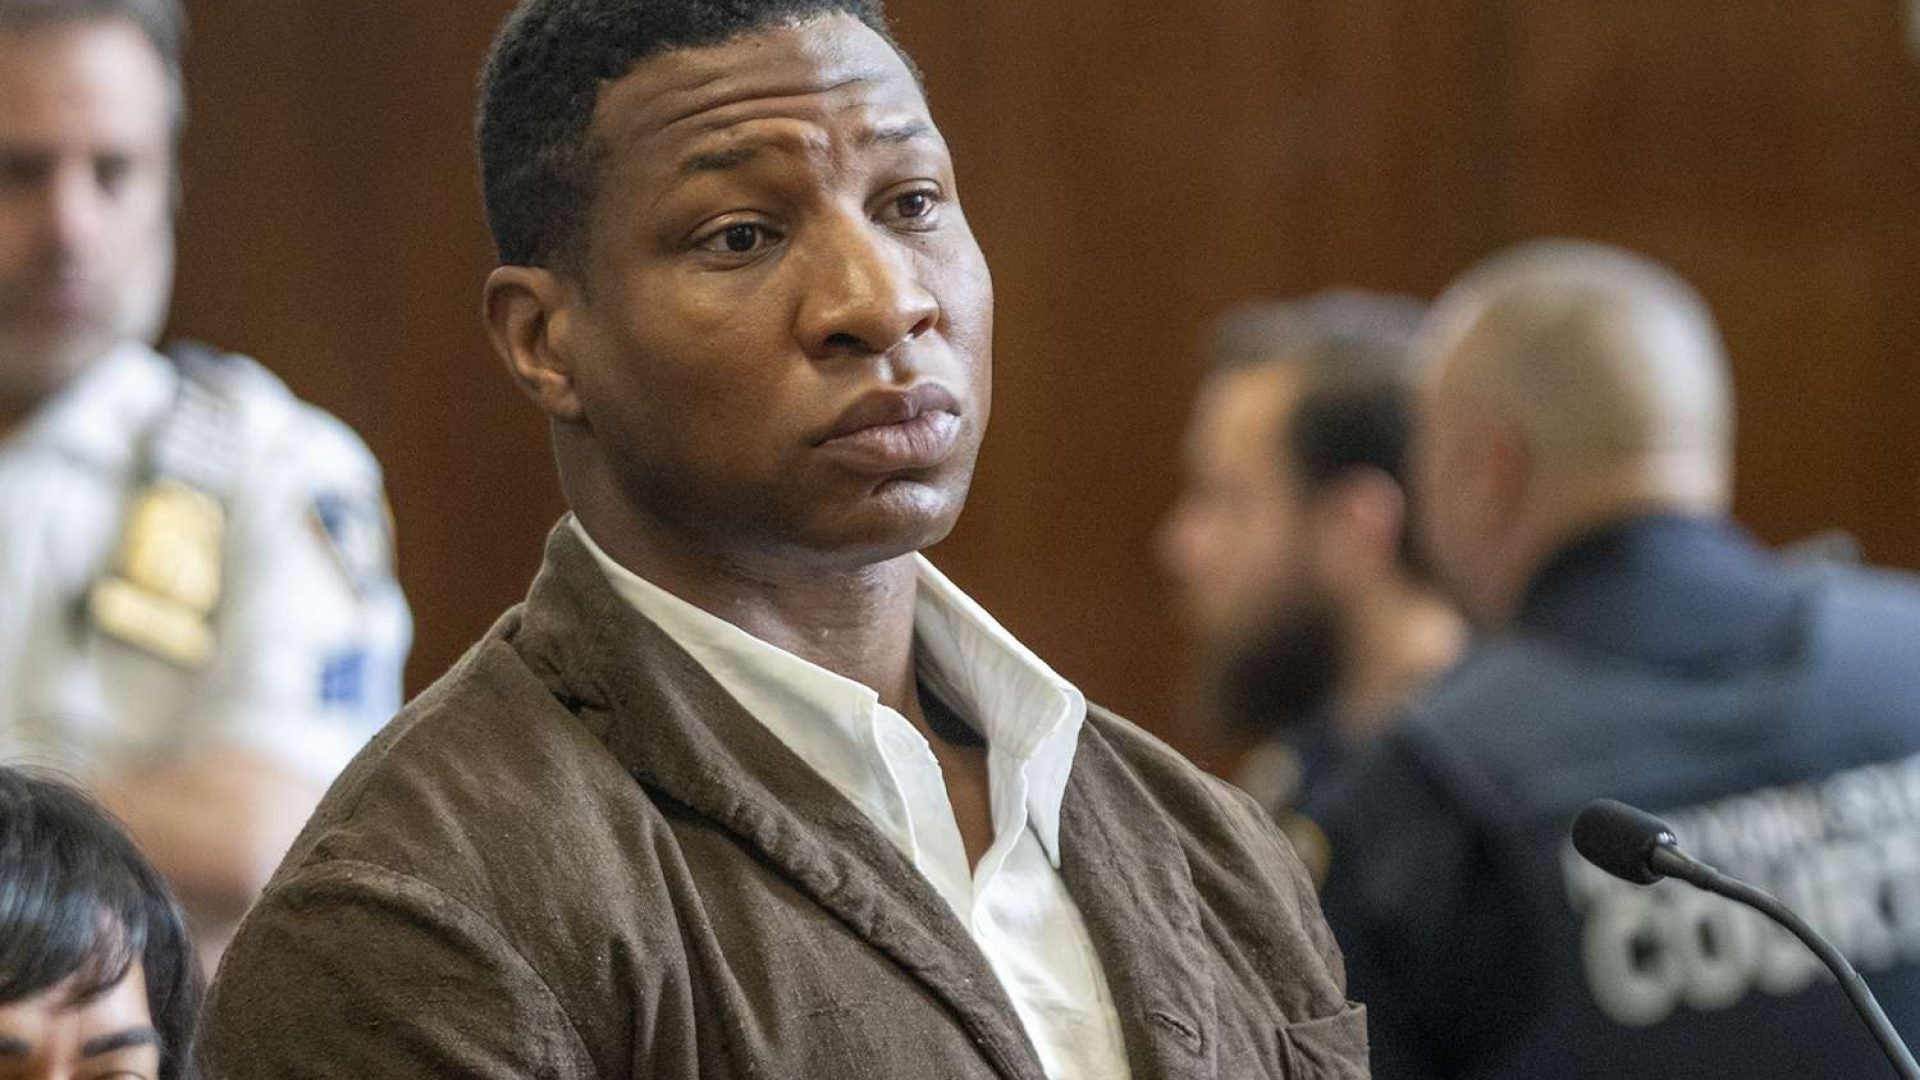 Jonathan Majors Found Guilty of Assault And Harassment